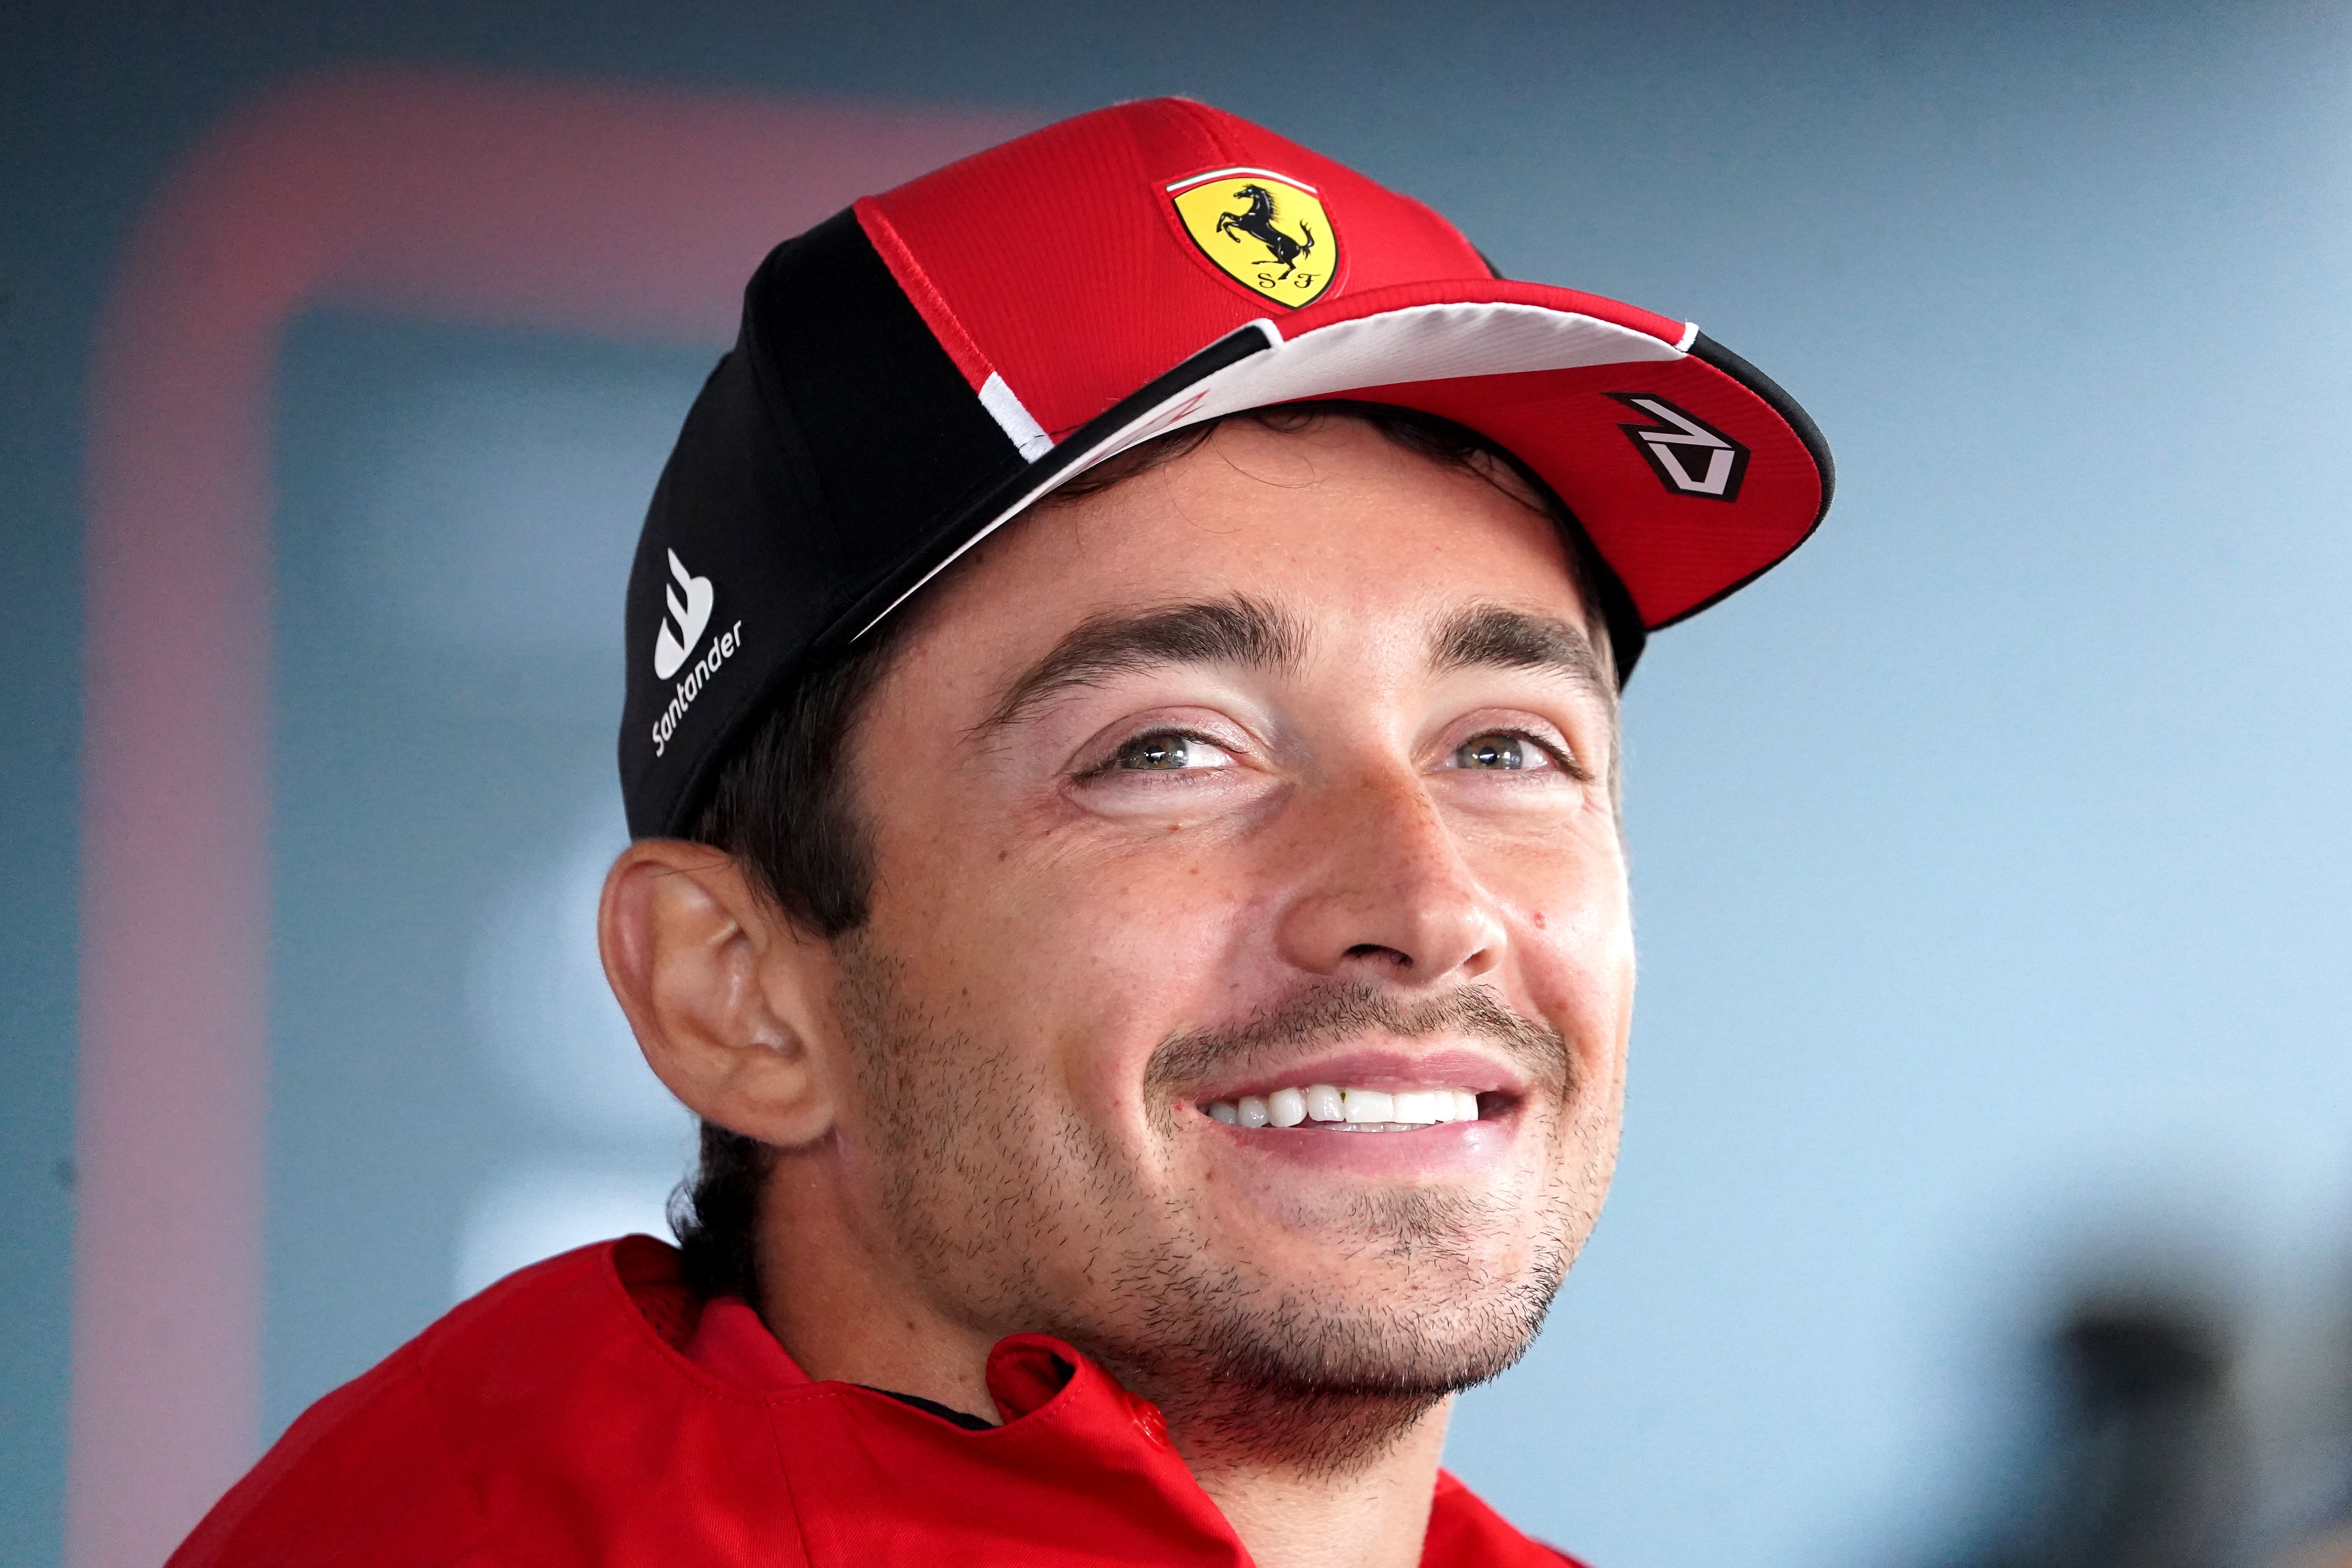 F1: Charles Leclerc signs new Ferrari contract ahead of 2024